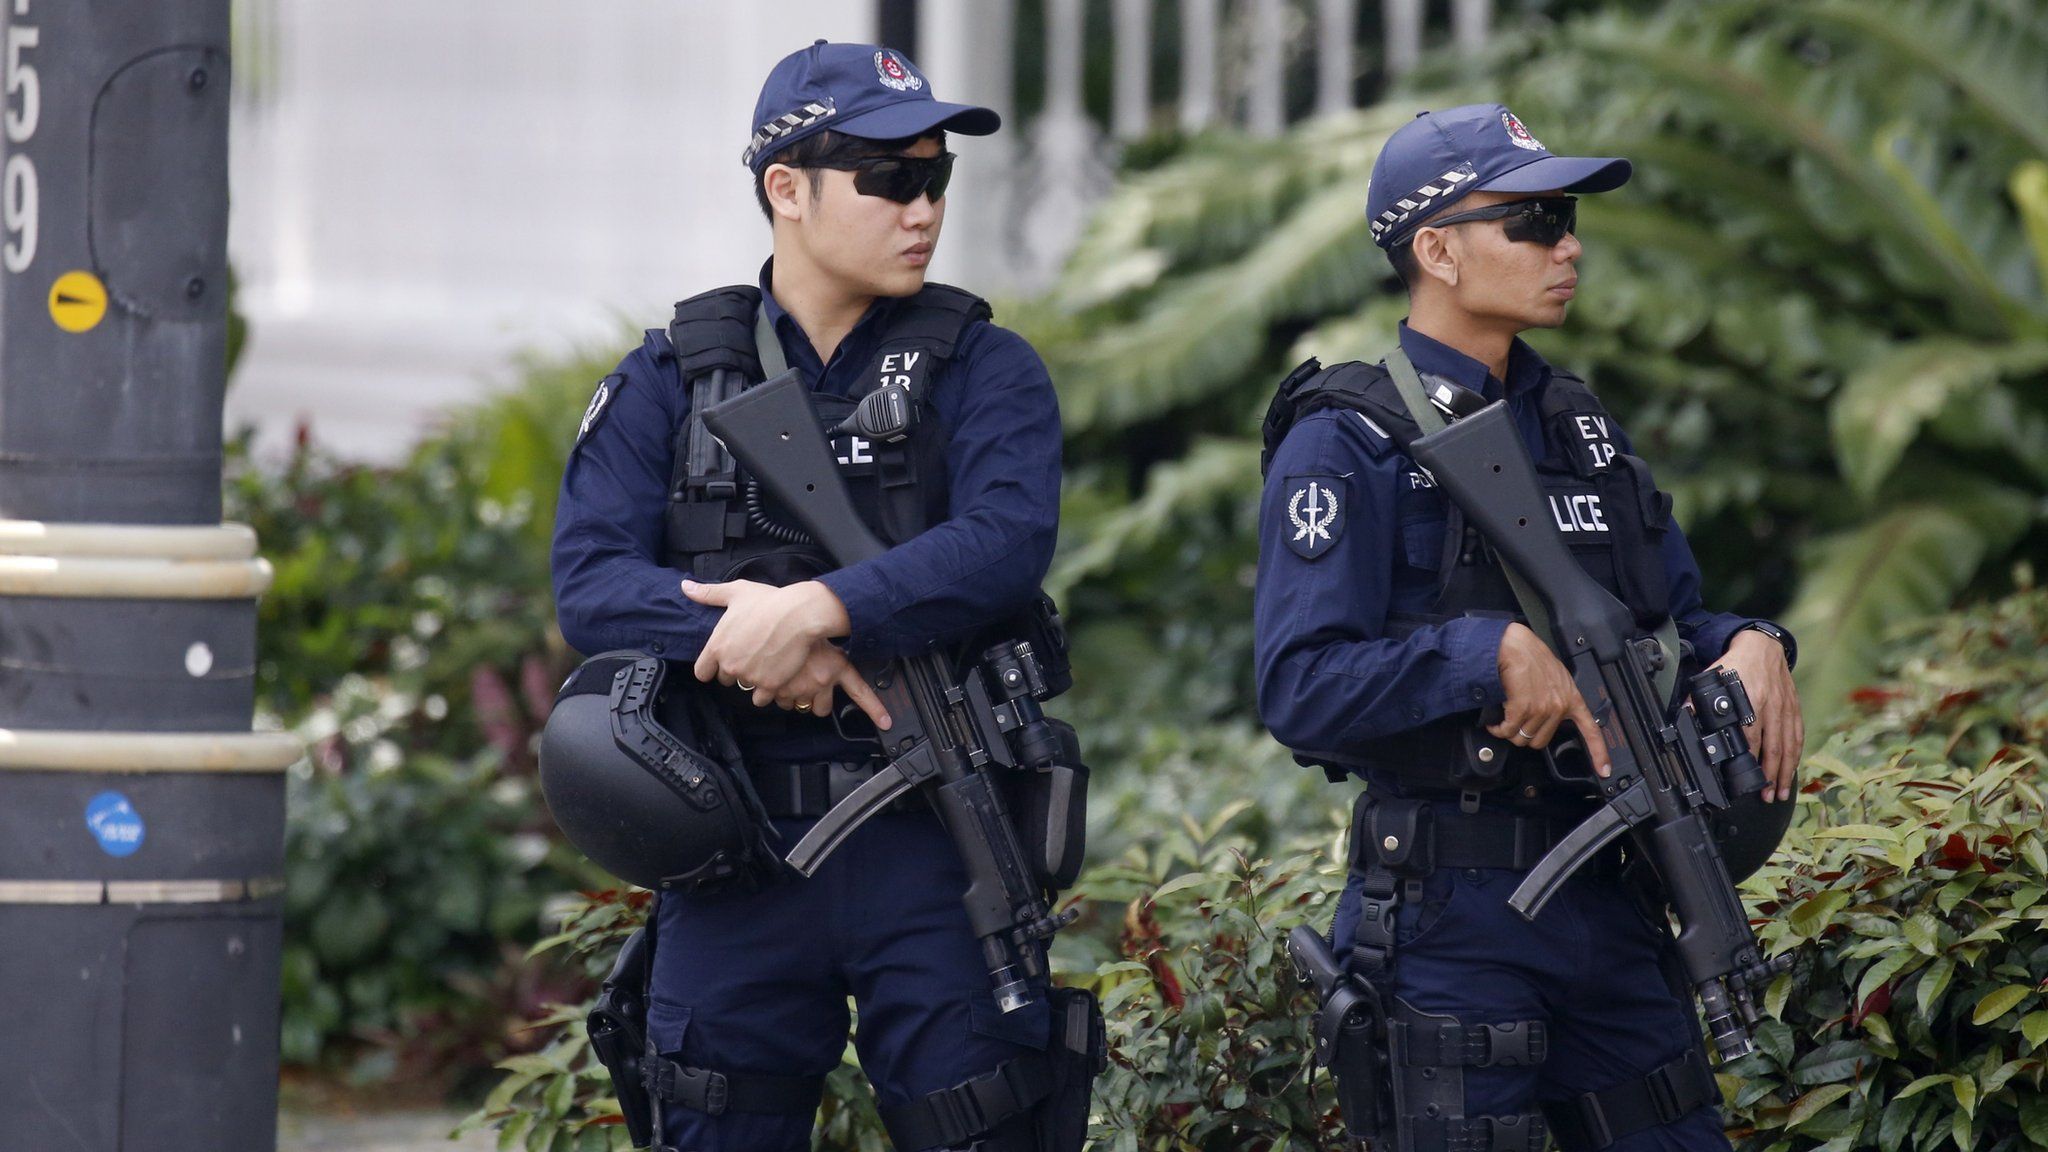 Singaporean security personnel stand guard near the Istana Presidential Palace, during the meeting between Donald Trump and Singapore Prime Minister Lee Hsien Loong in Singapore (11 June 2018)